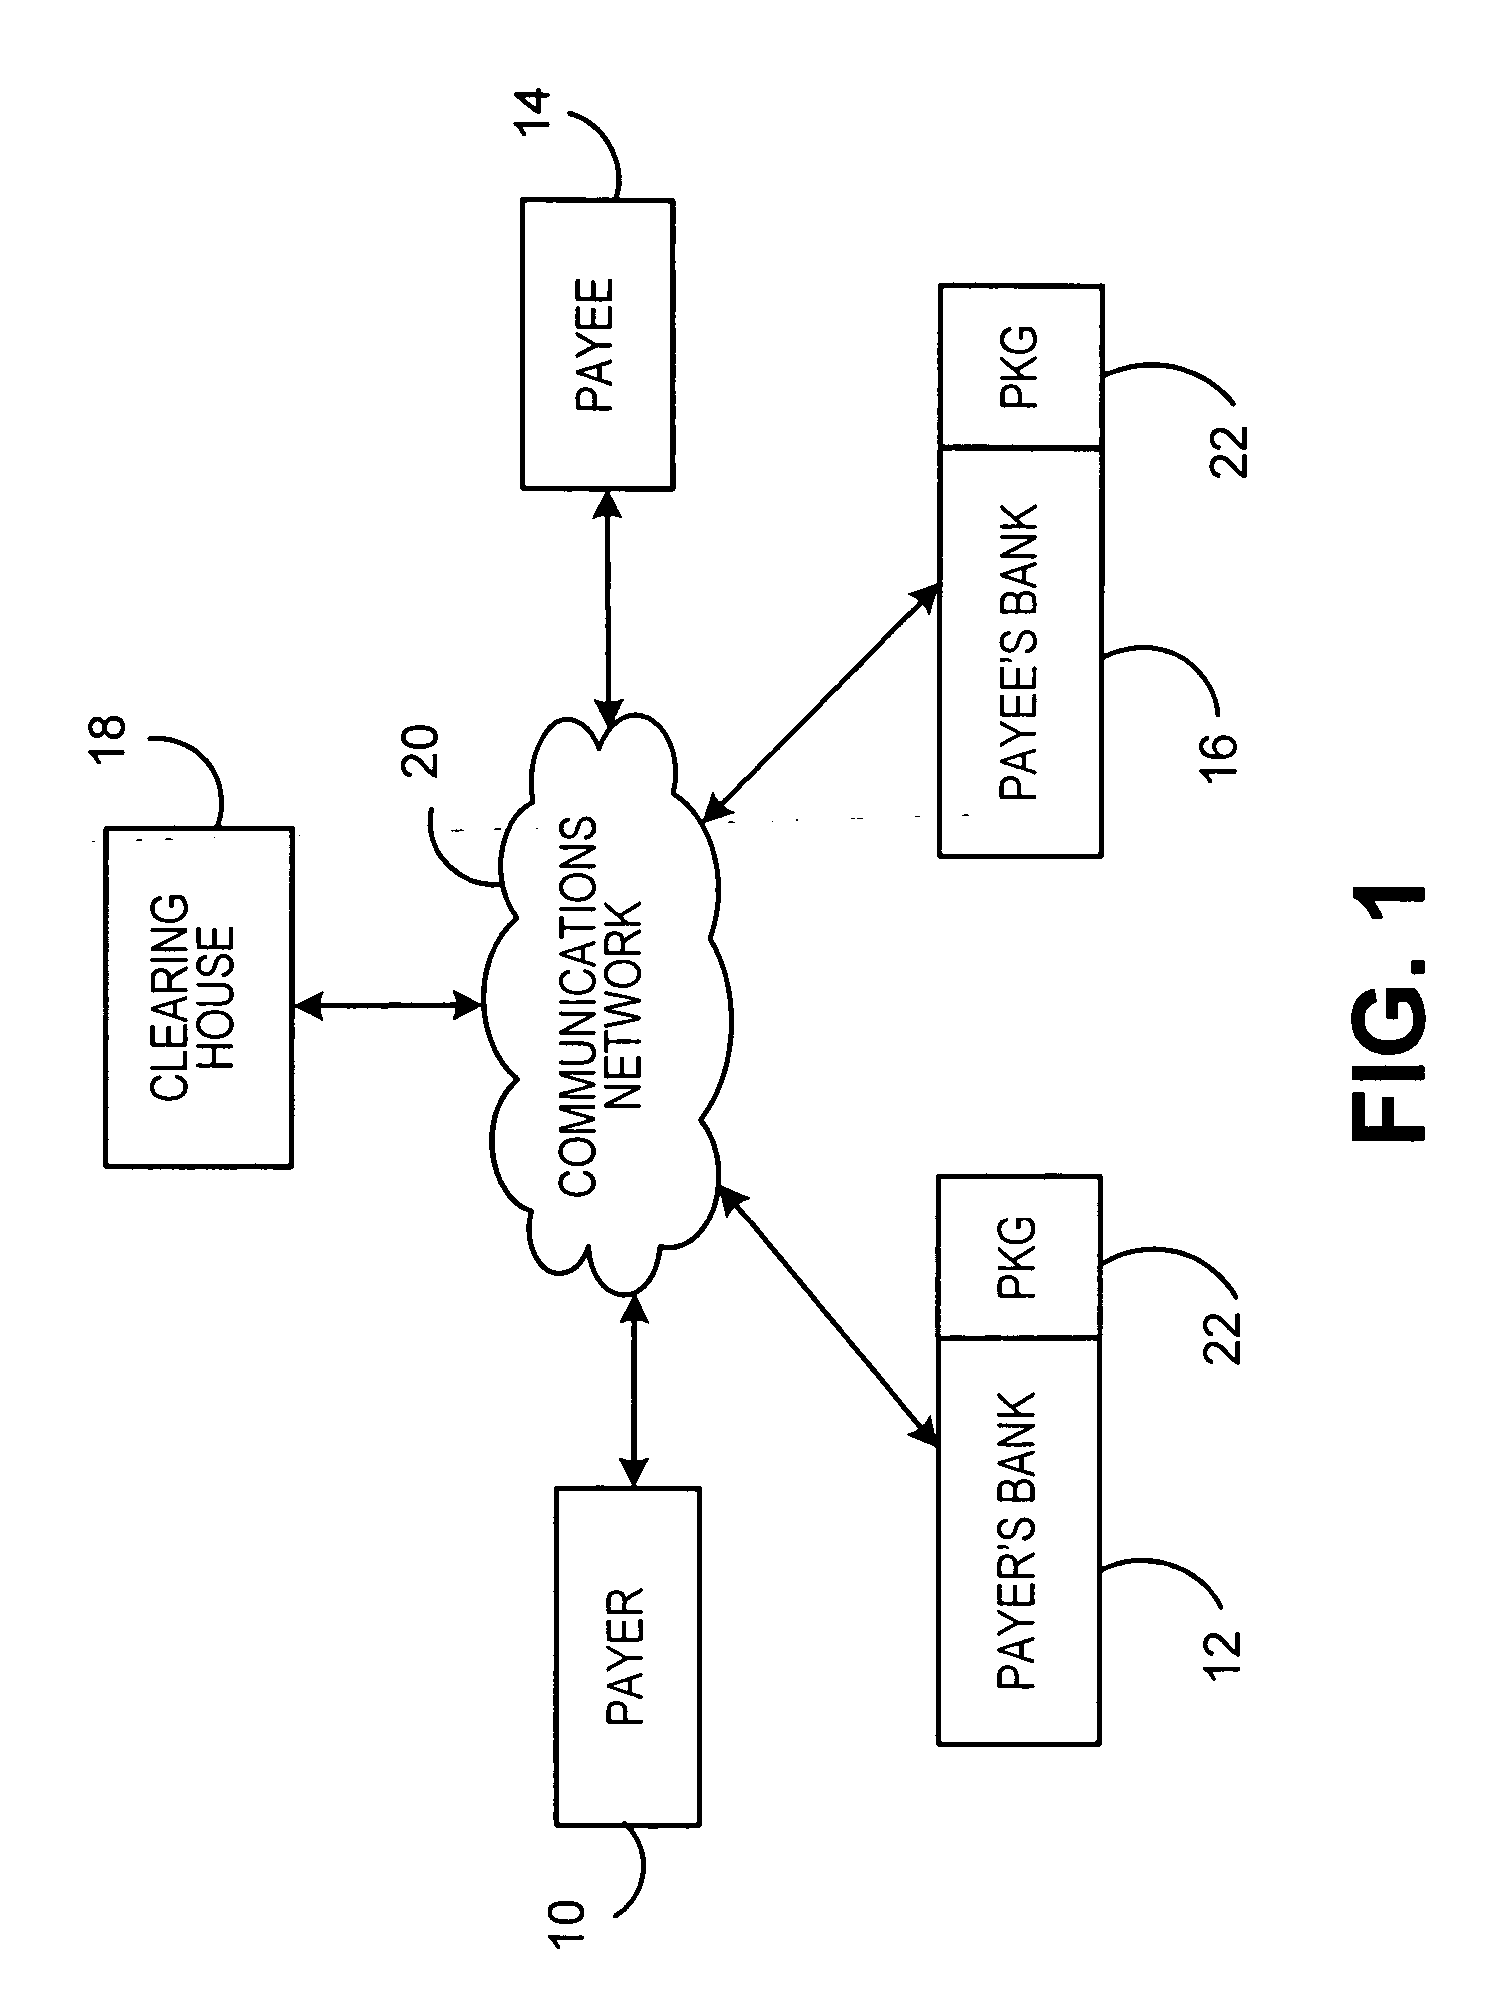 Method and system for postdating of financial transactions